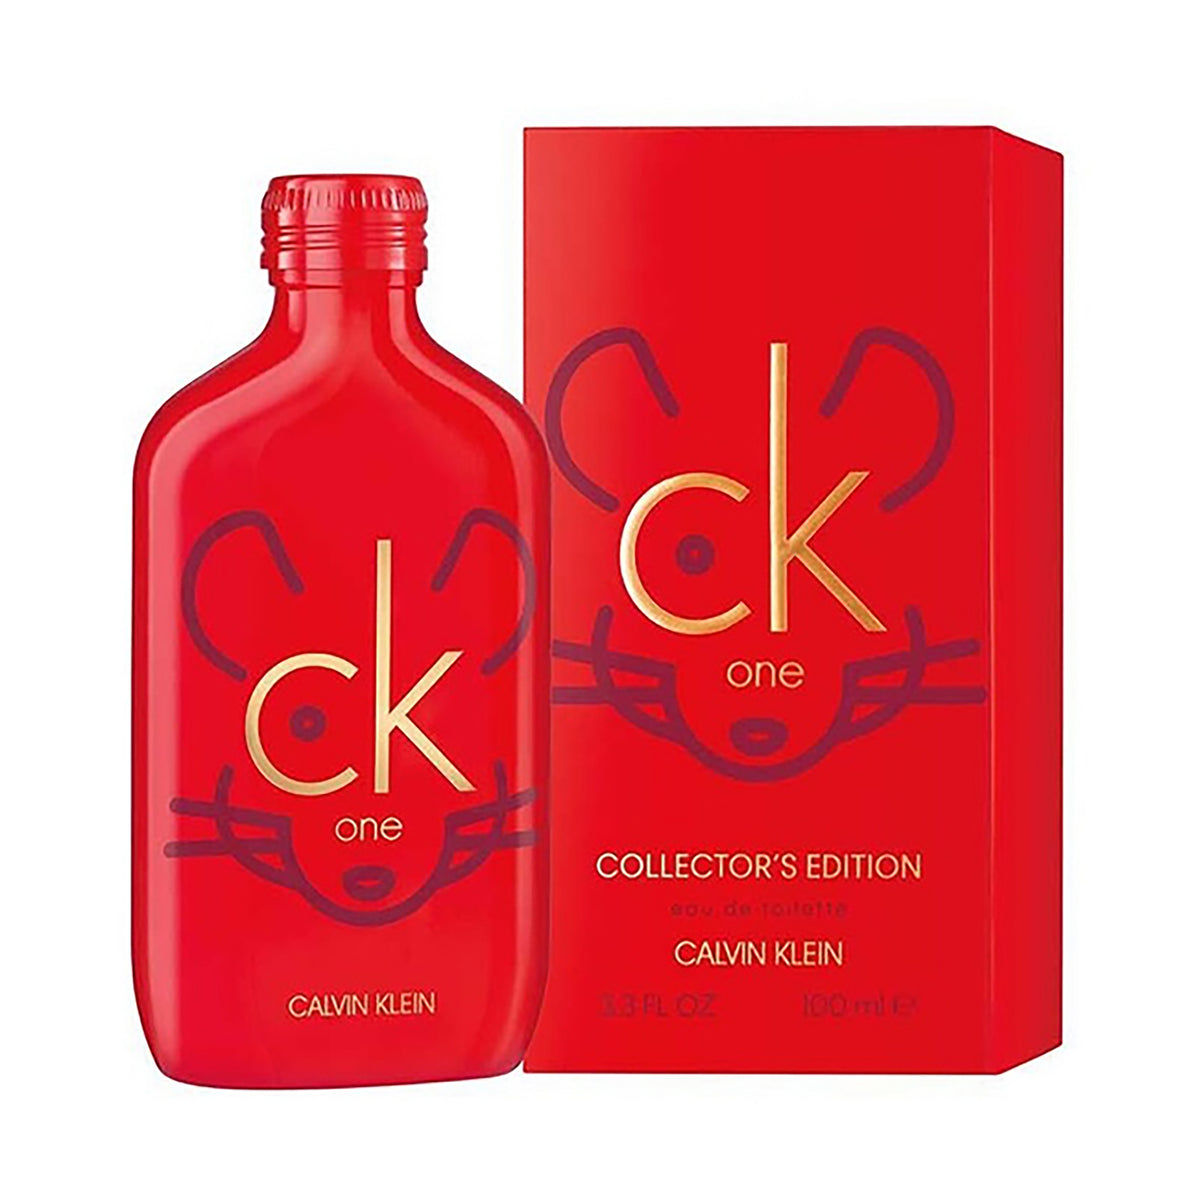 Ck One Collector's Edition – Dollars u0026 Scent